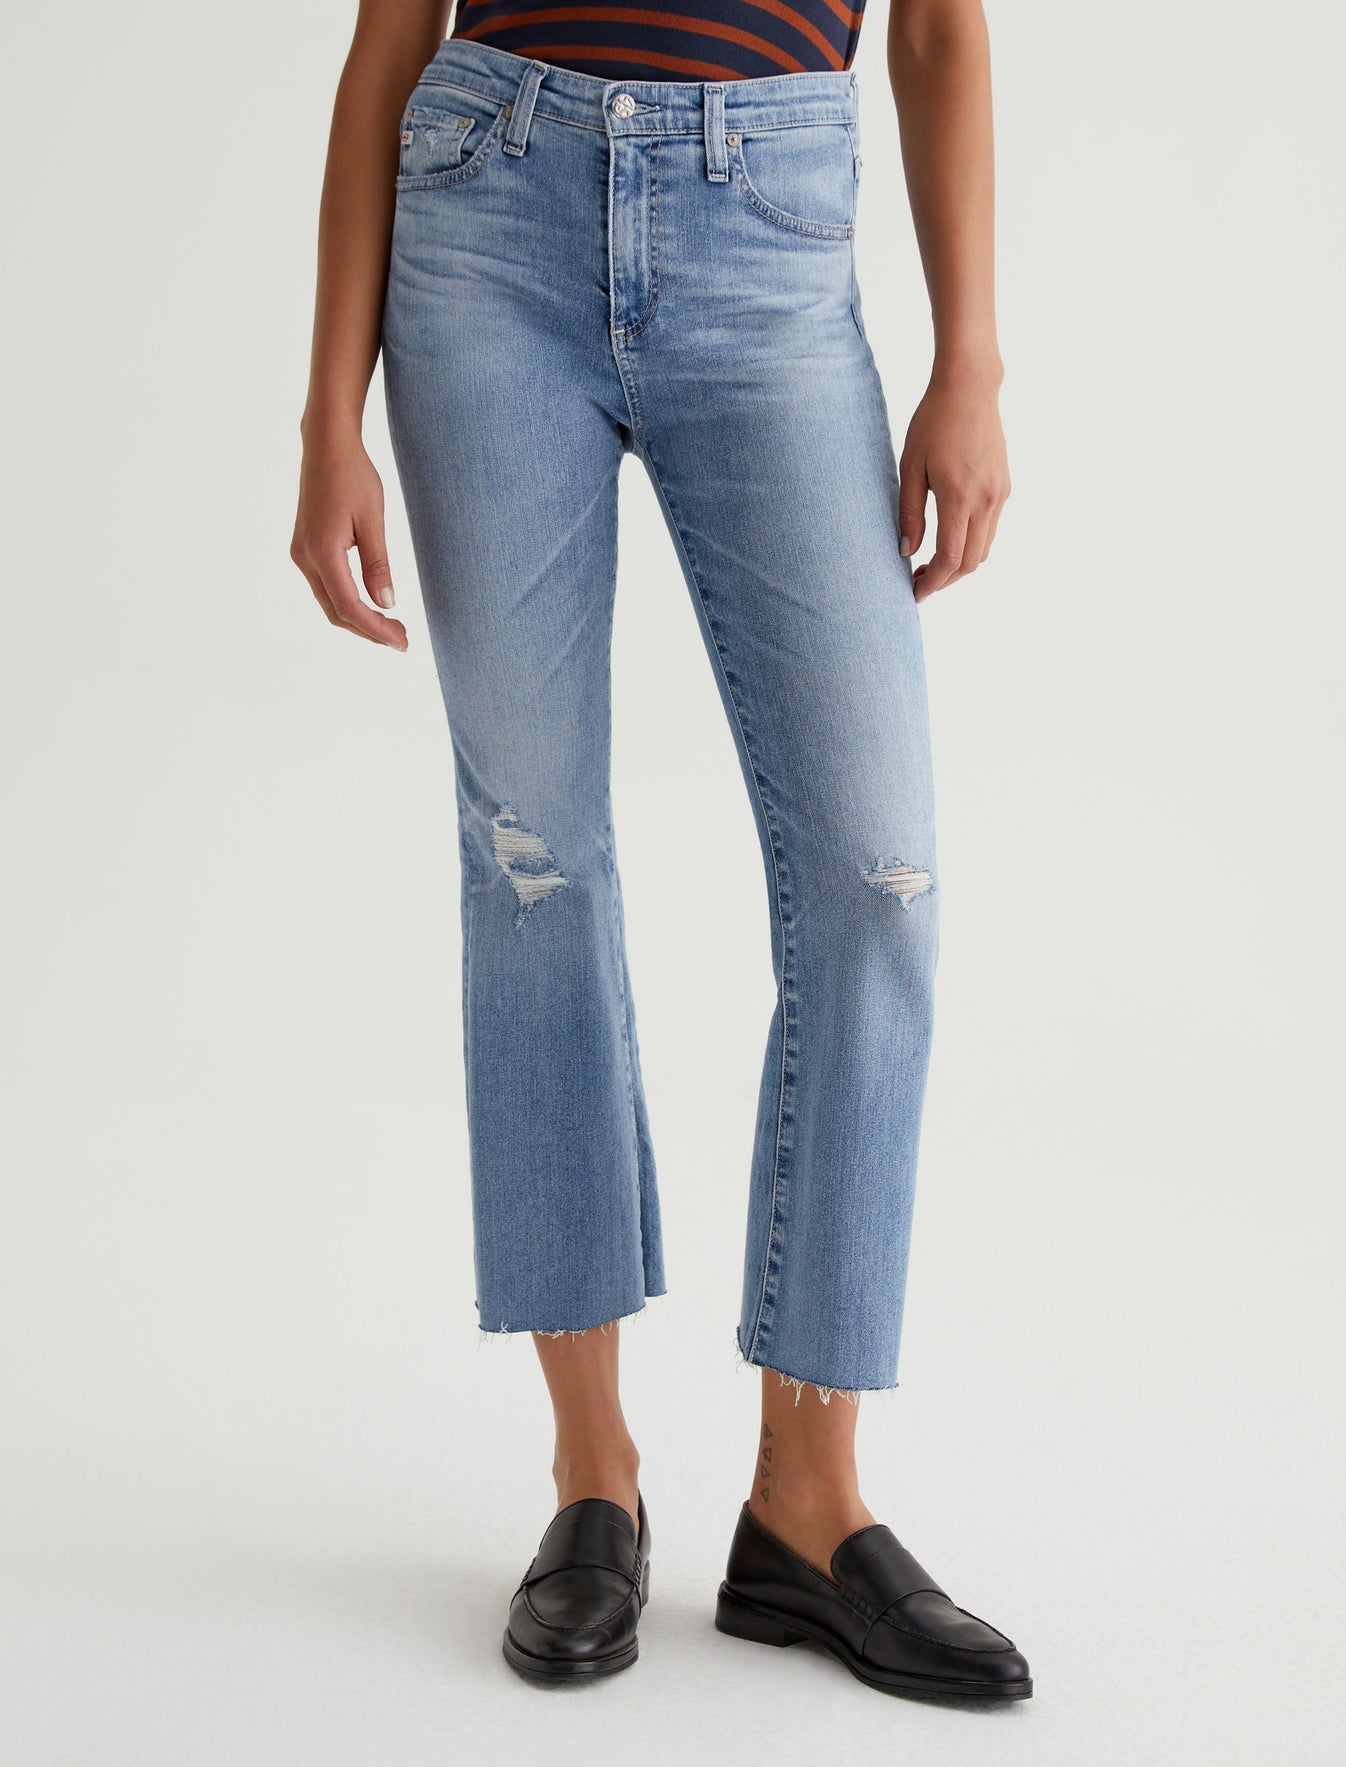 Buy Levi's Women's High Waisted Taper Jeans, FYI, 24 (US 00) at